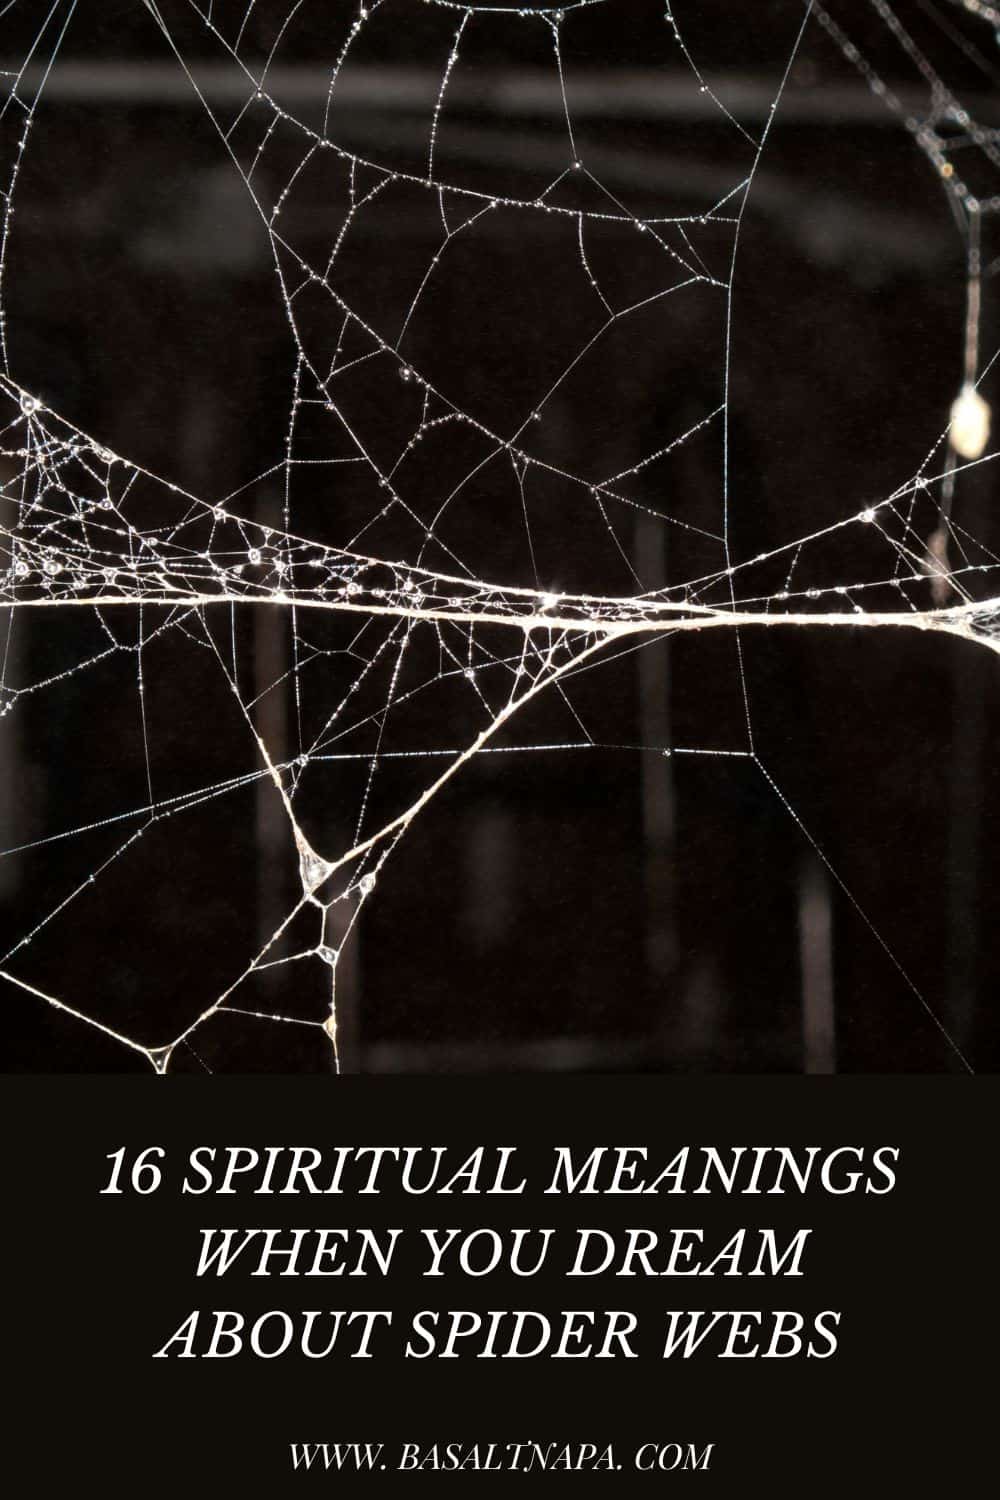 16 Spiritual Meanings When you Dream About Spider Webs